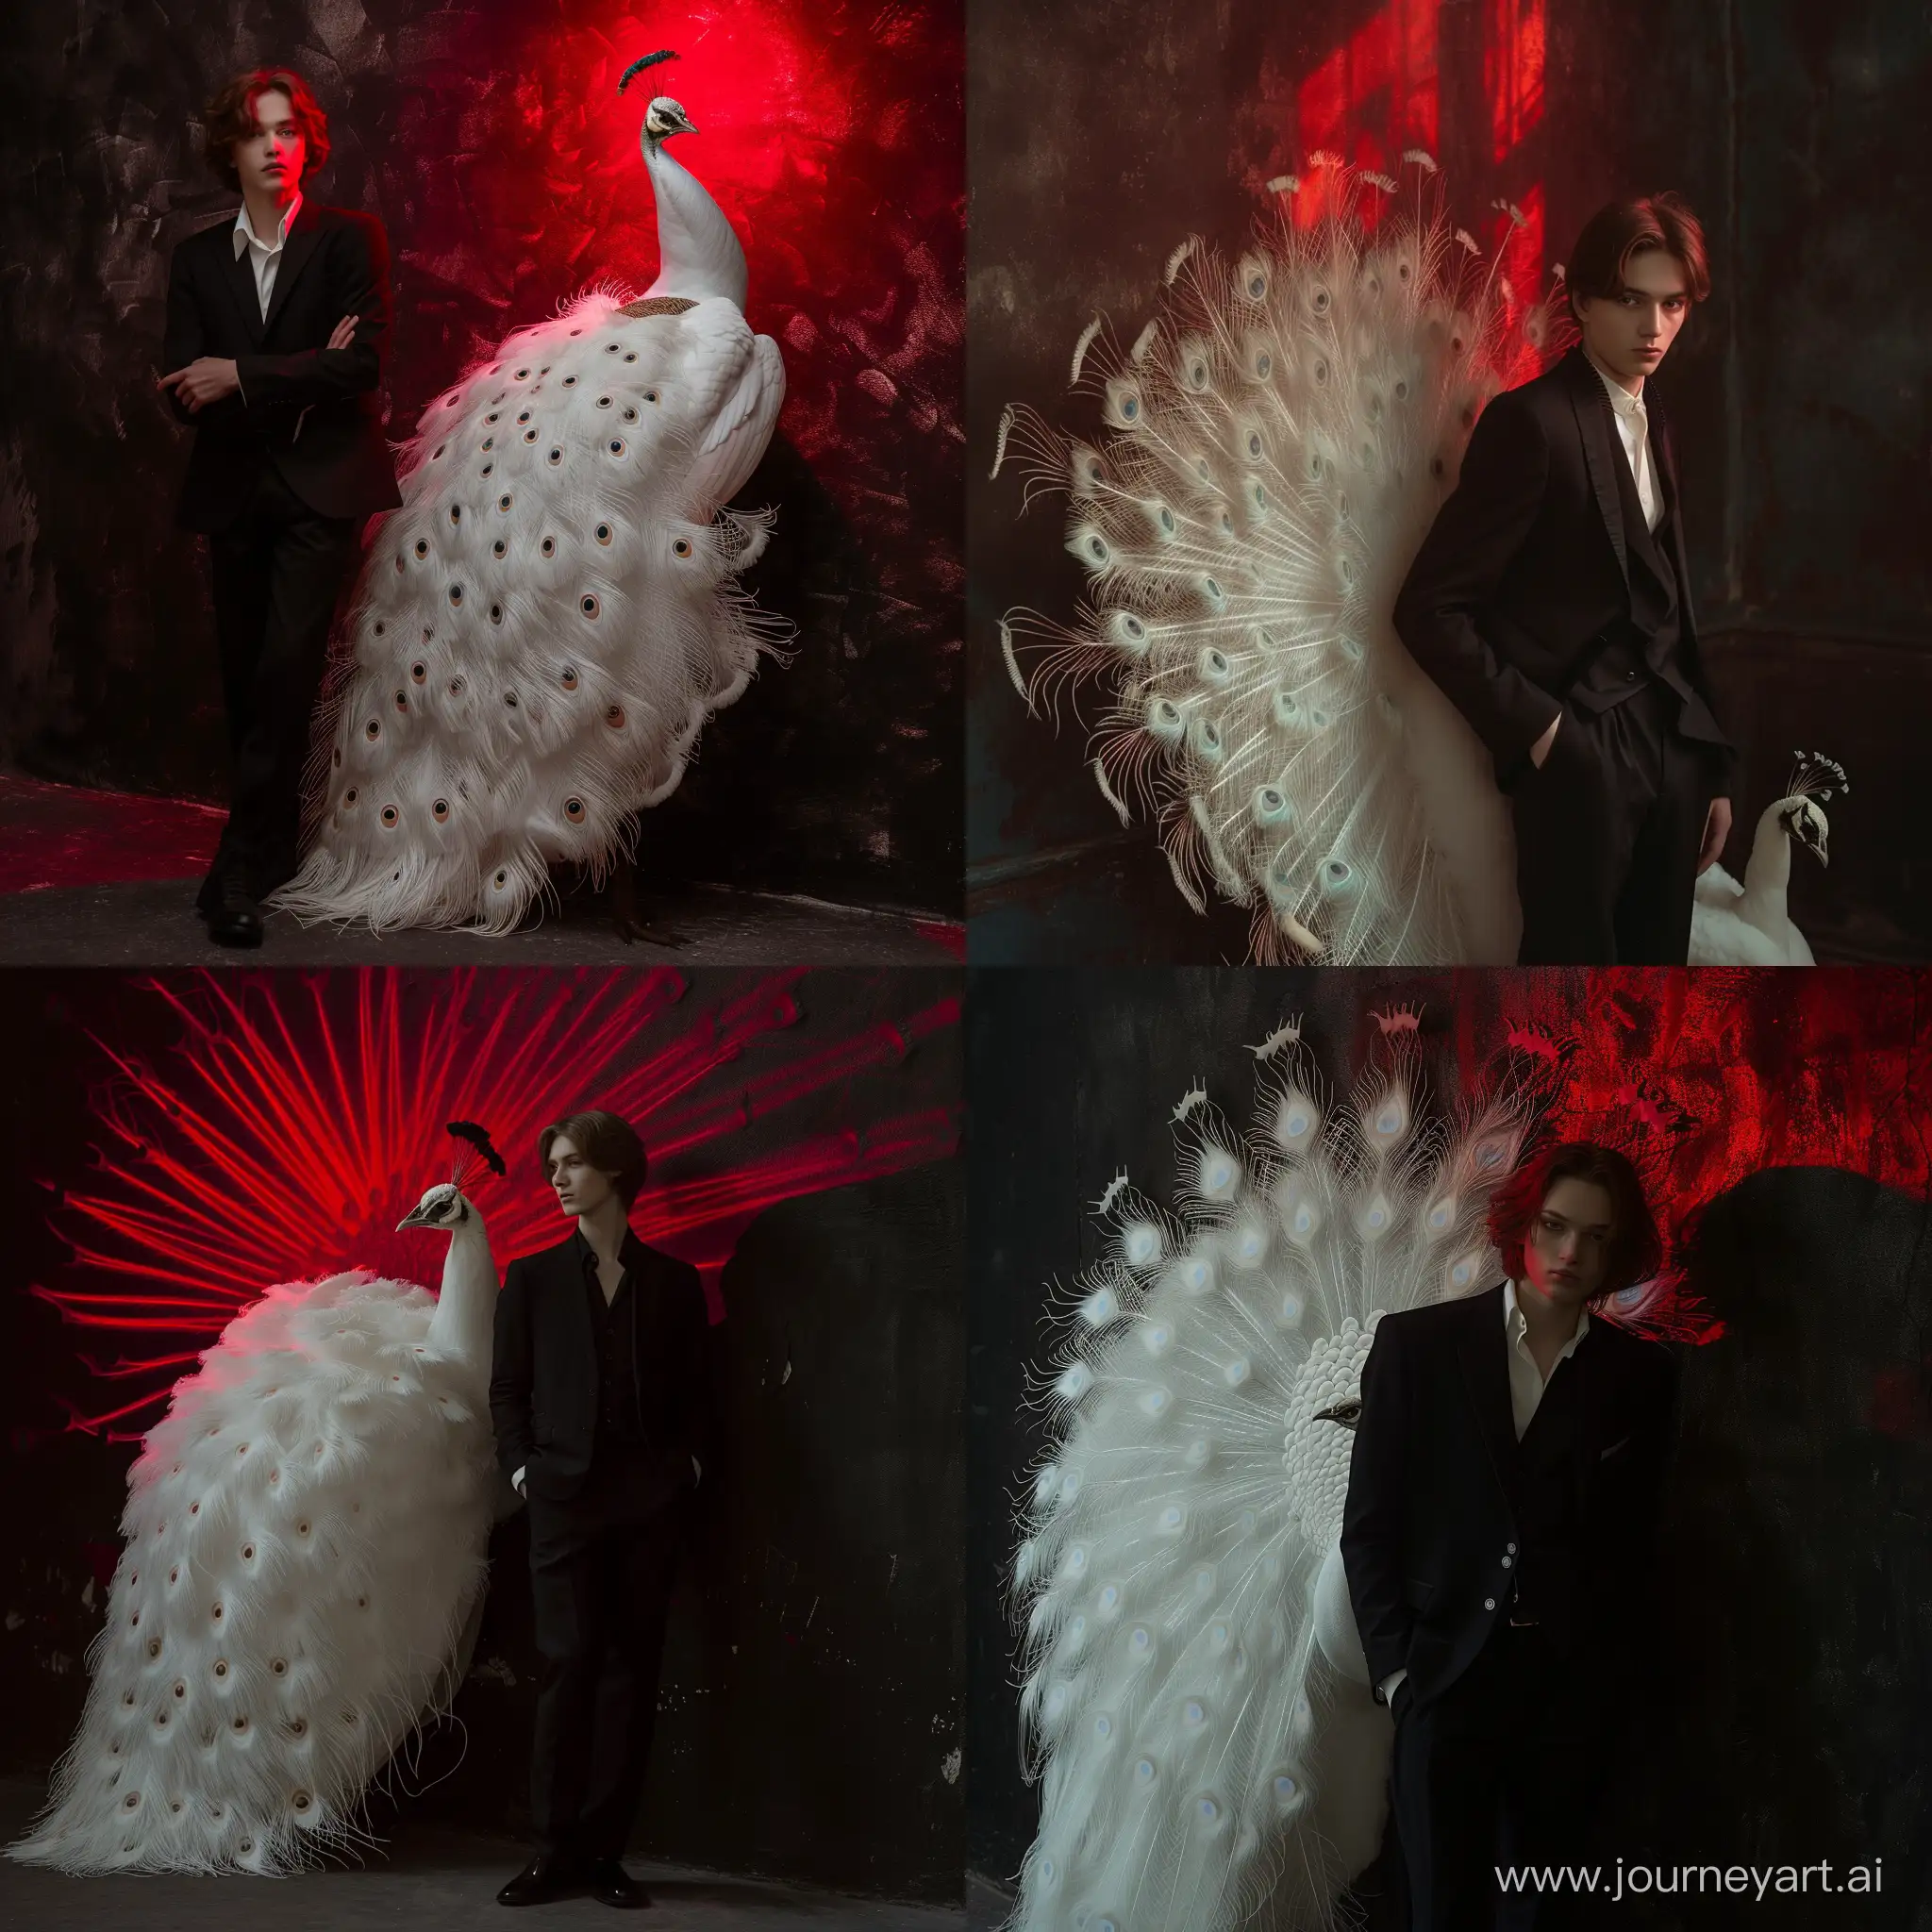 RAW photo slender Russian 19-year-old brown-haired guy in a black suit next to a large white peacock against a dark wall in the studio, red backlight, variations, dynamic angles and poses, fashion photography, fashion week, imperfect skin